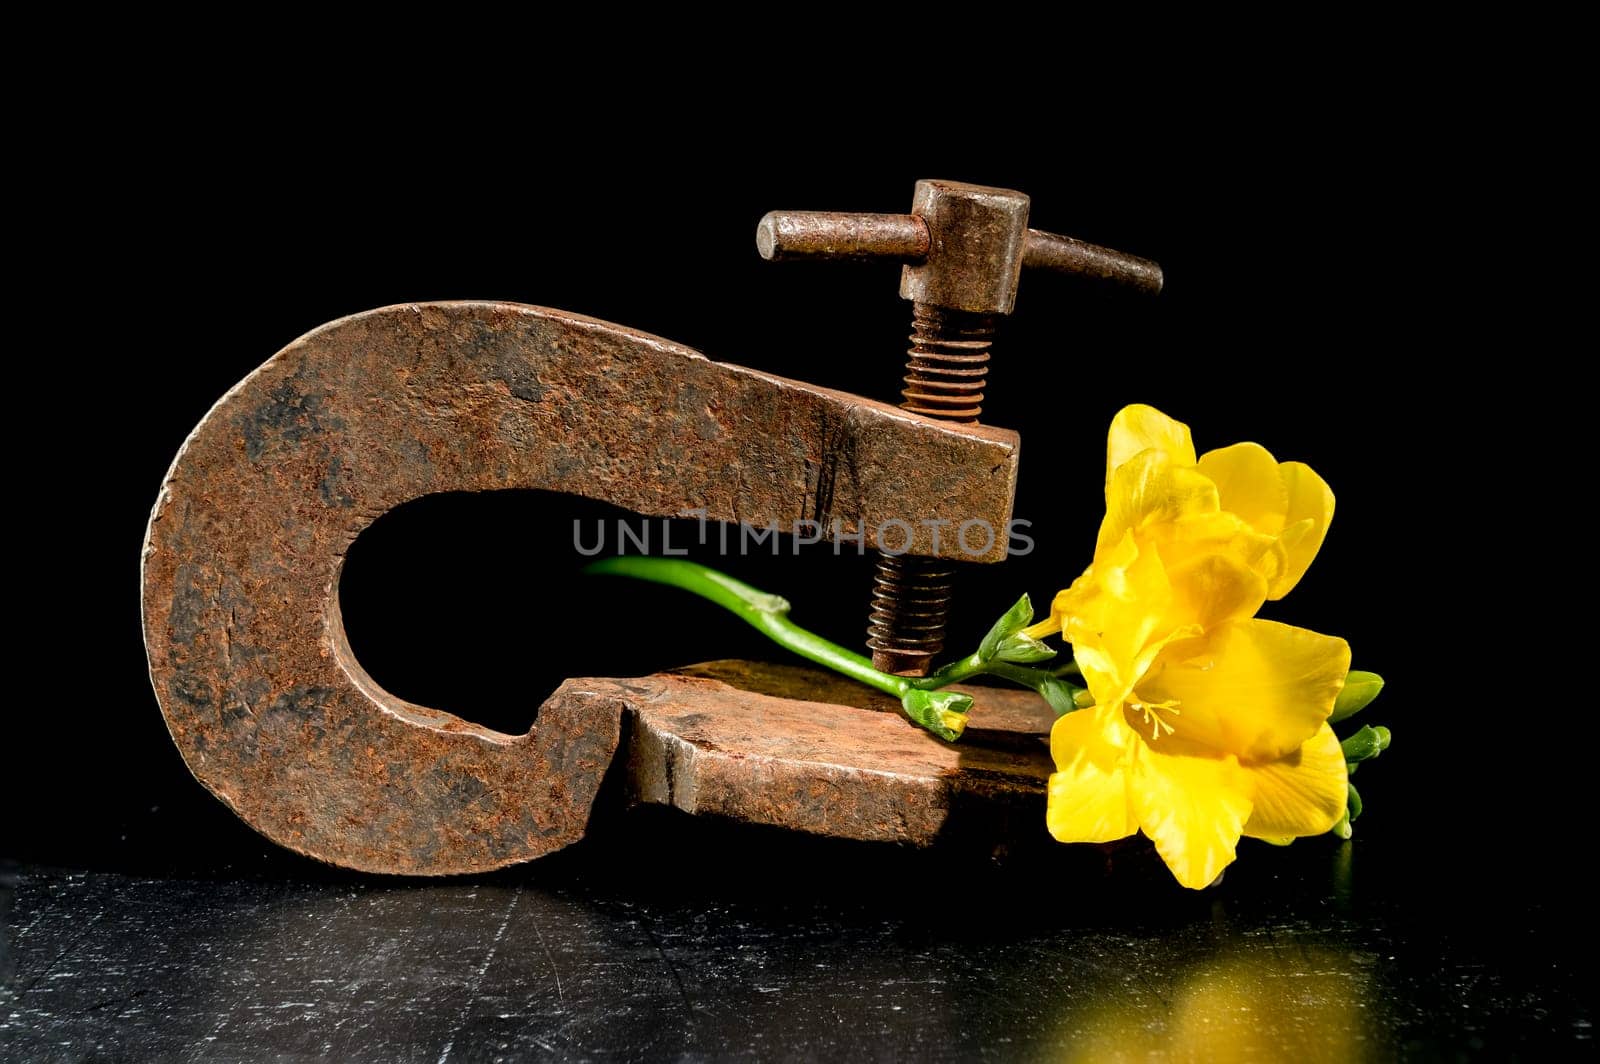 Creative still life with old rusty metal clamp and yellow freesia flower on a black background